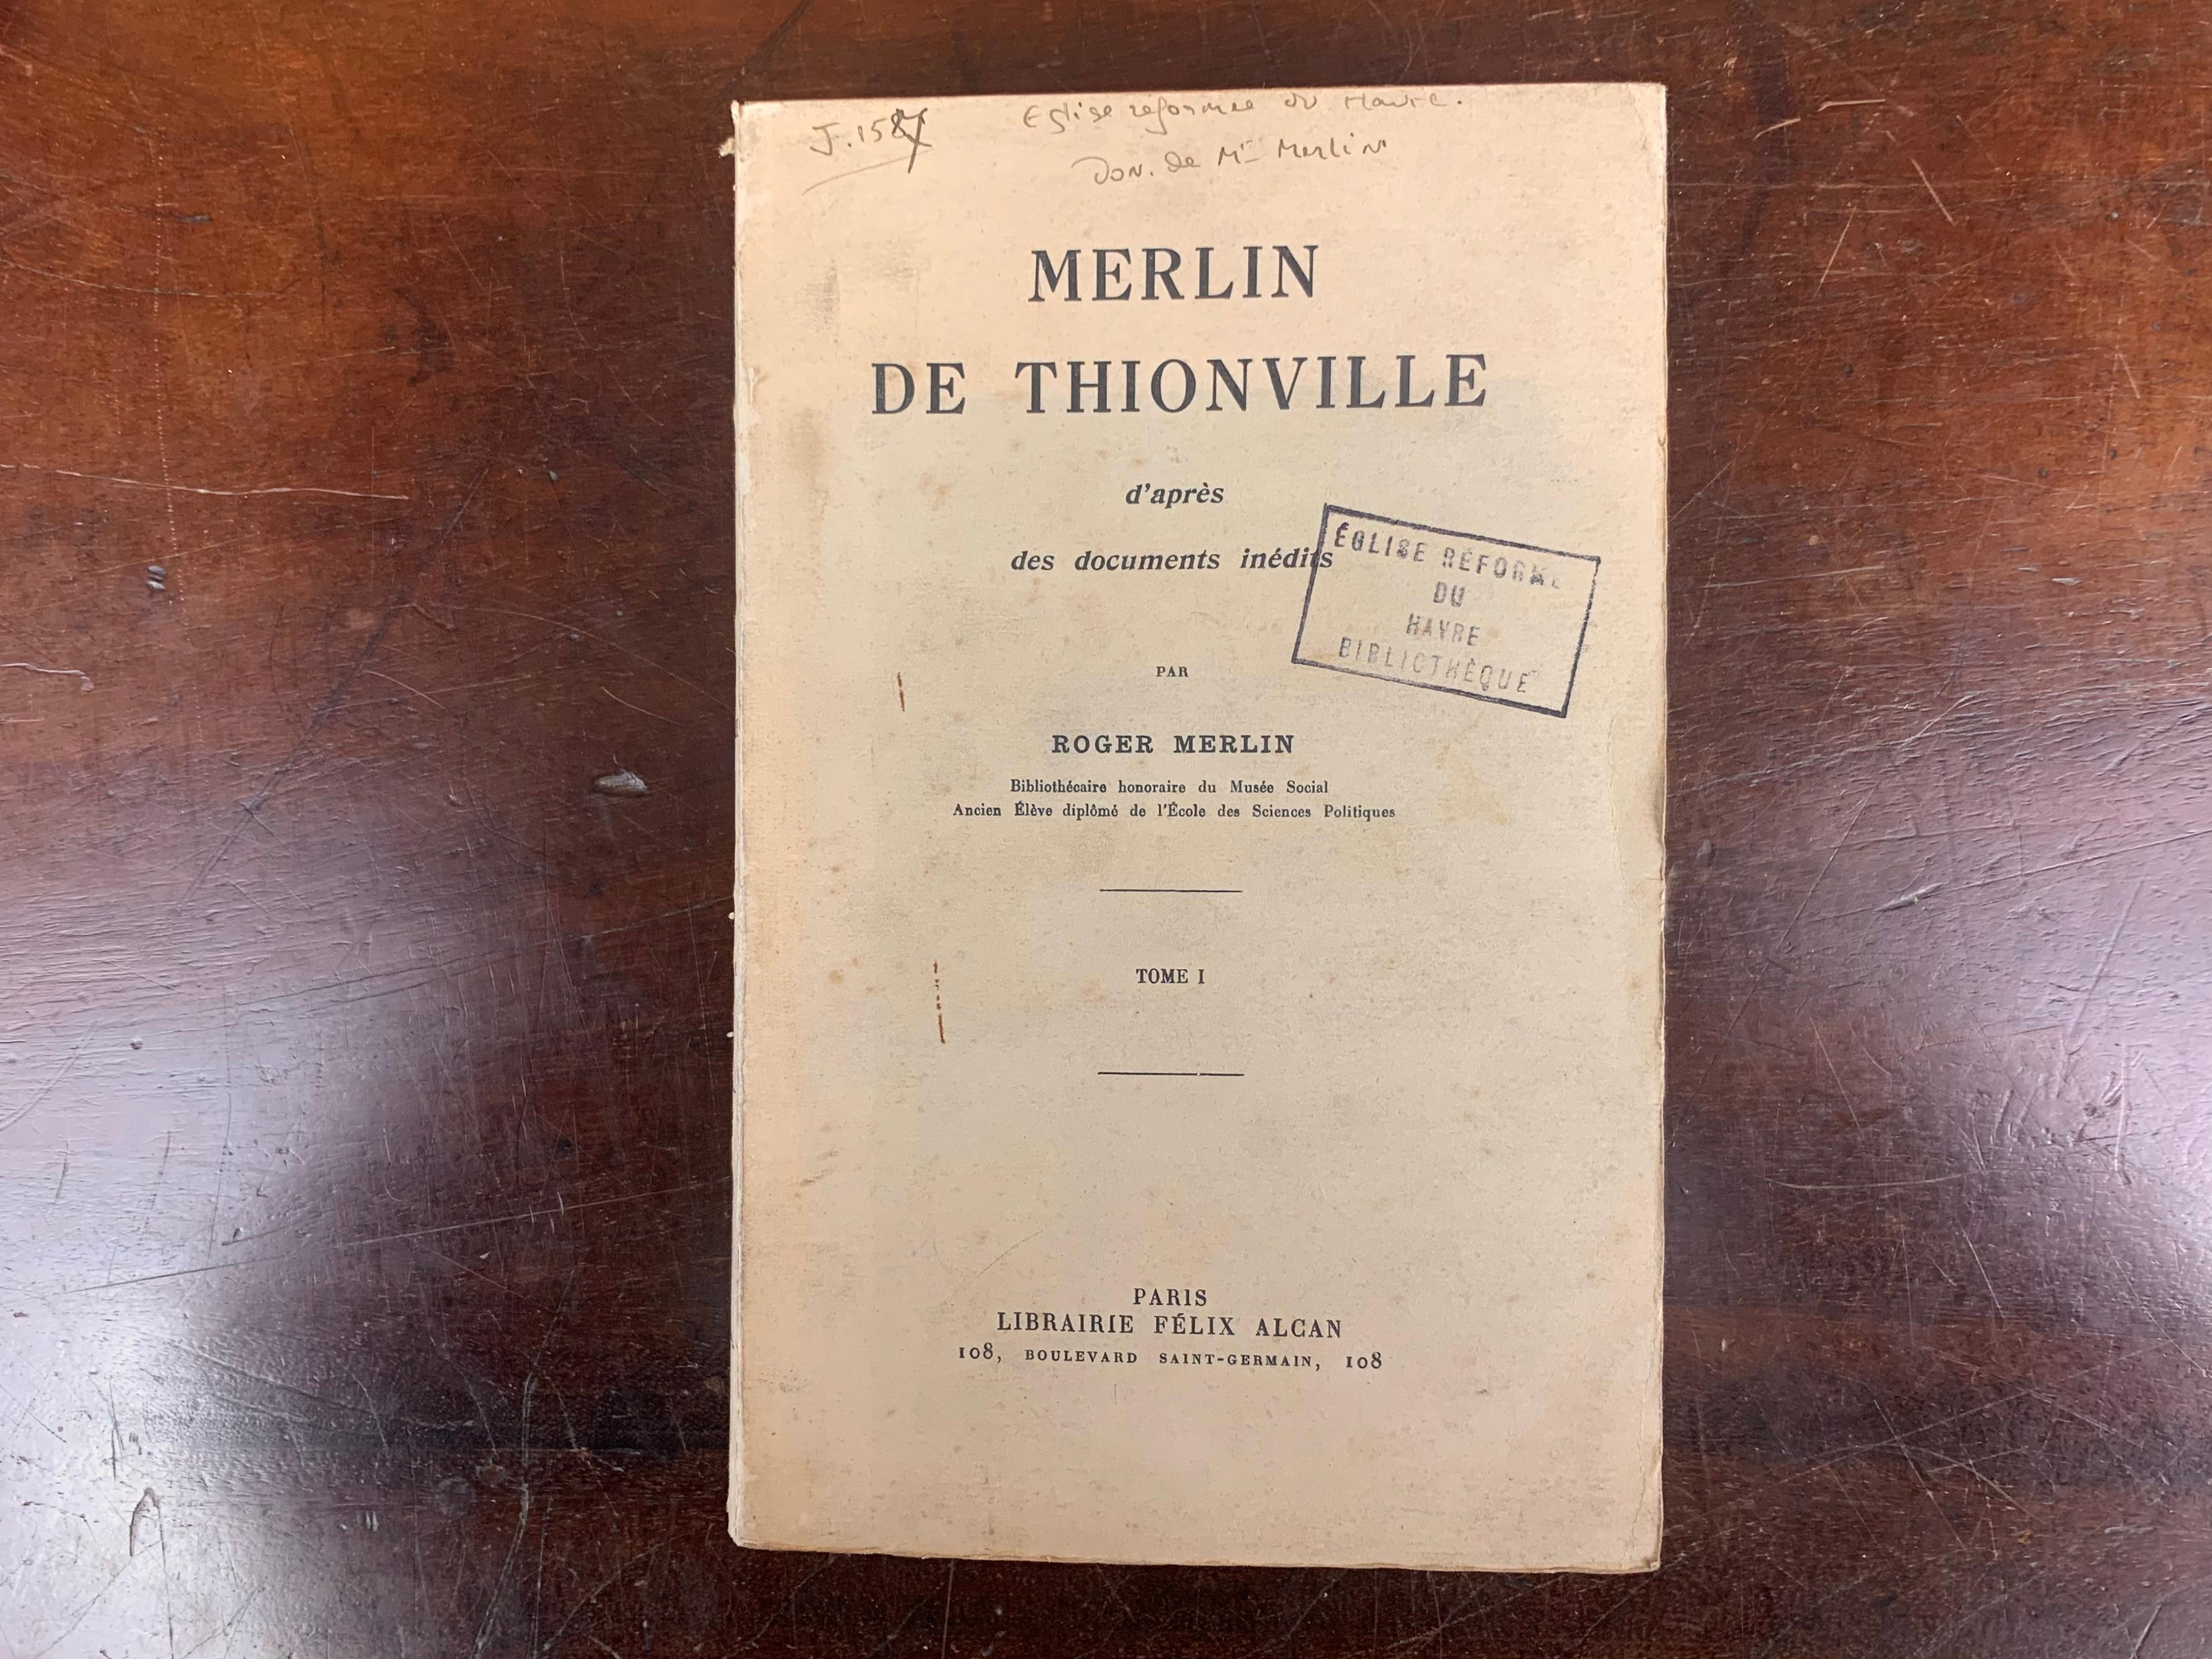 These two books contain different documents on Merlin de Thionville, former French deputy of the 18th century. This reprint dates from 1927. Set of old books dating from the 20th century. From an old protestant library near Le Havre in France. These